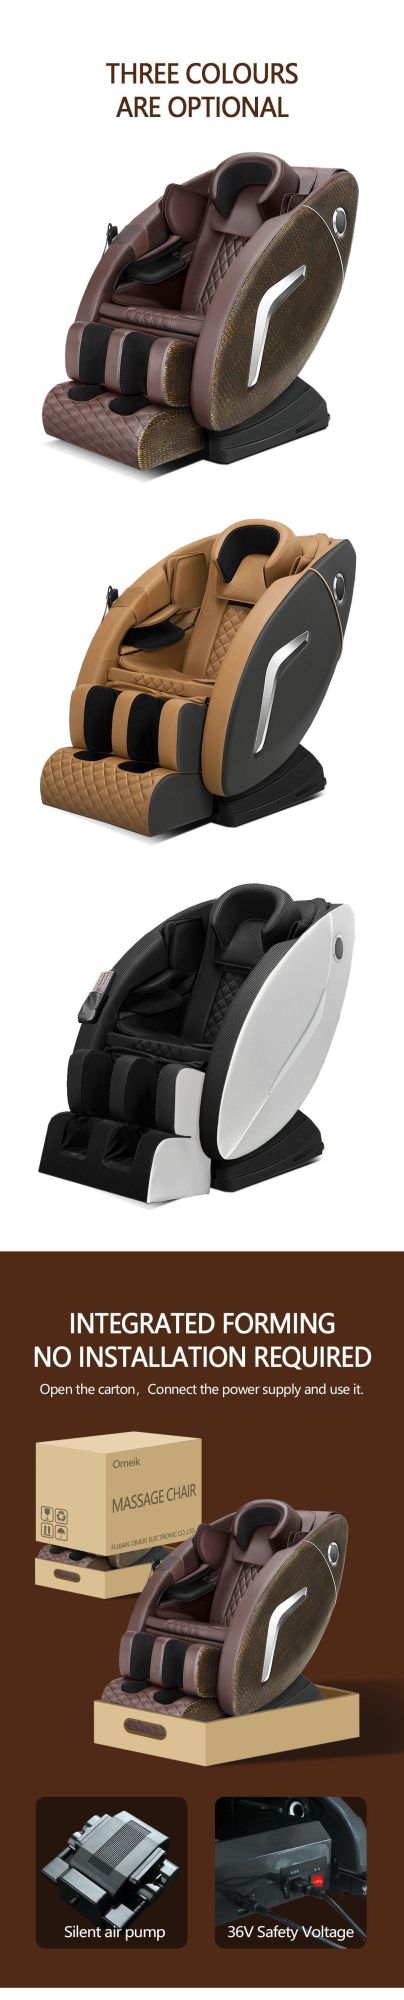 Healthcare 3D Zero Gravity Full Body Relax Massage Chair with U Pillow